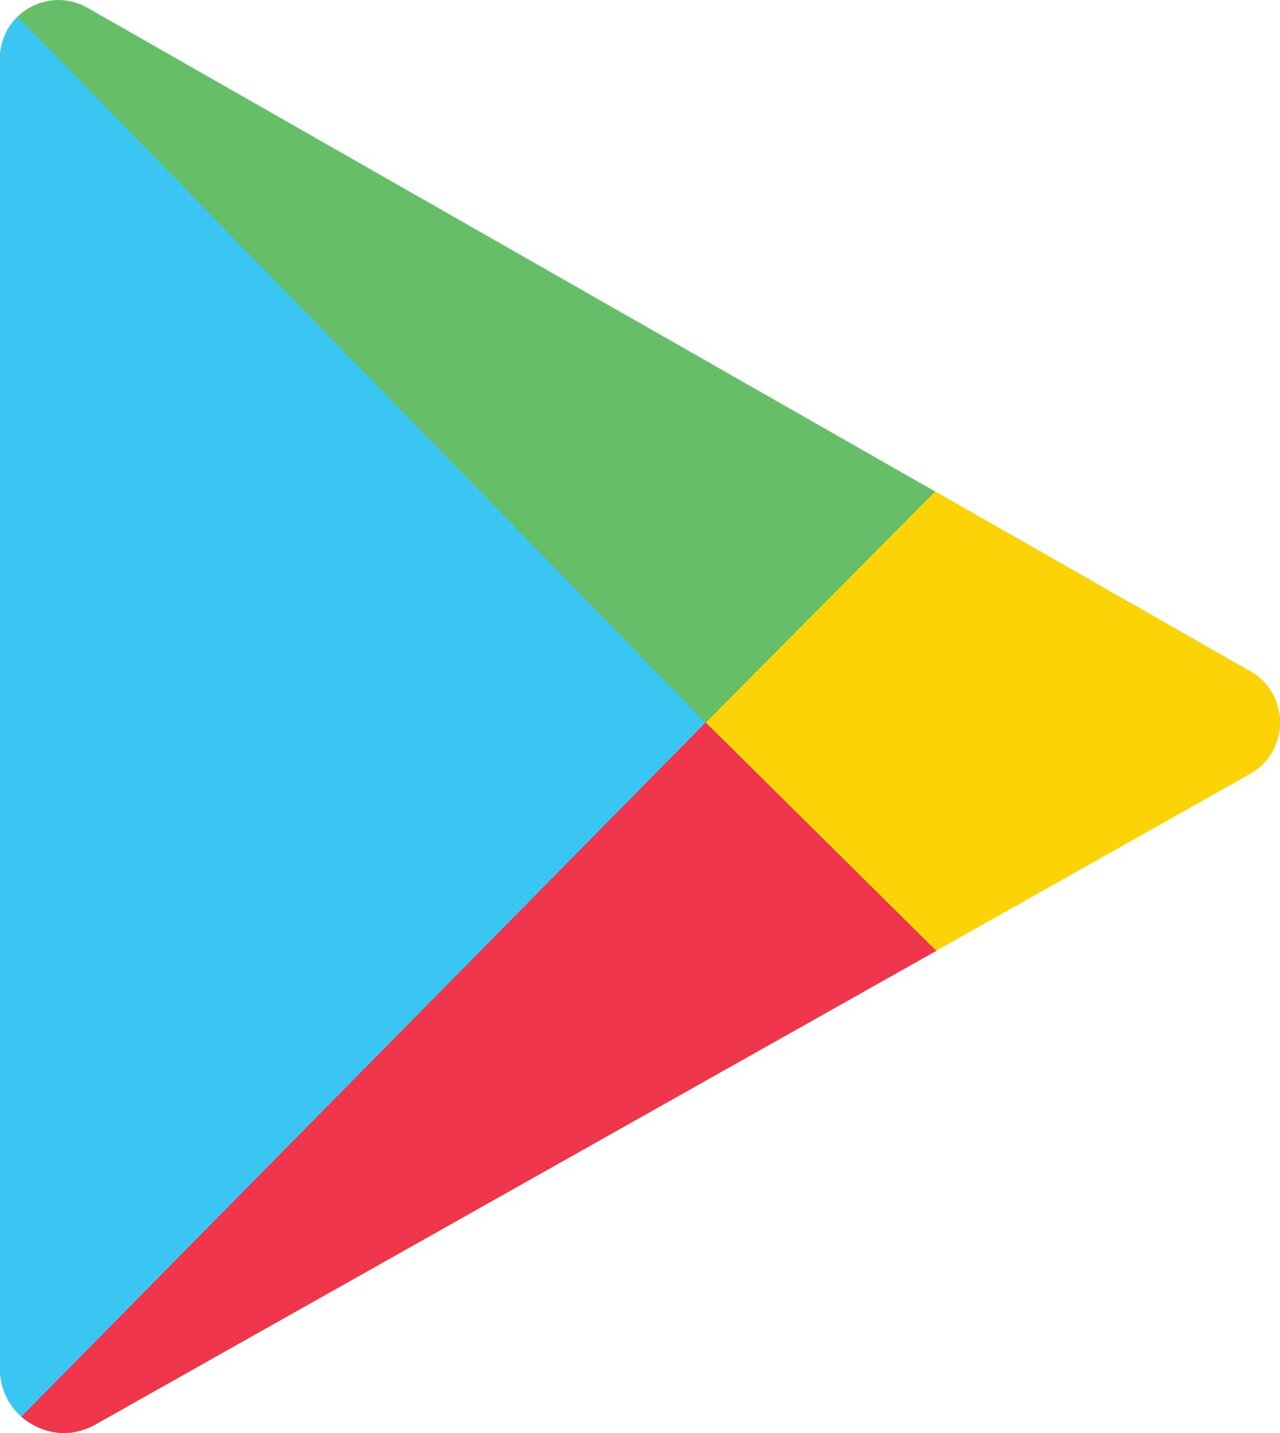 For Google Play, dominating the Android ecosystem was 'existential